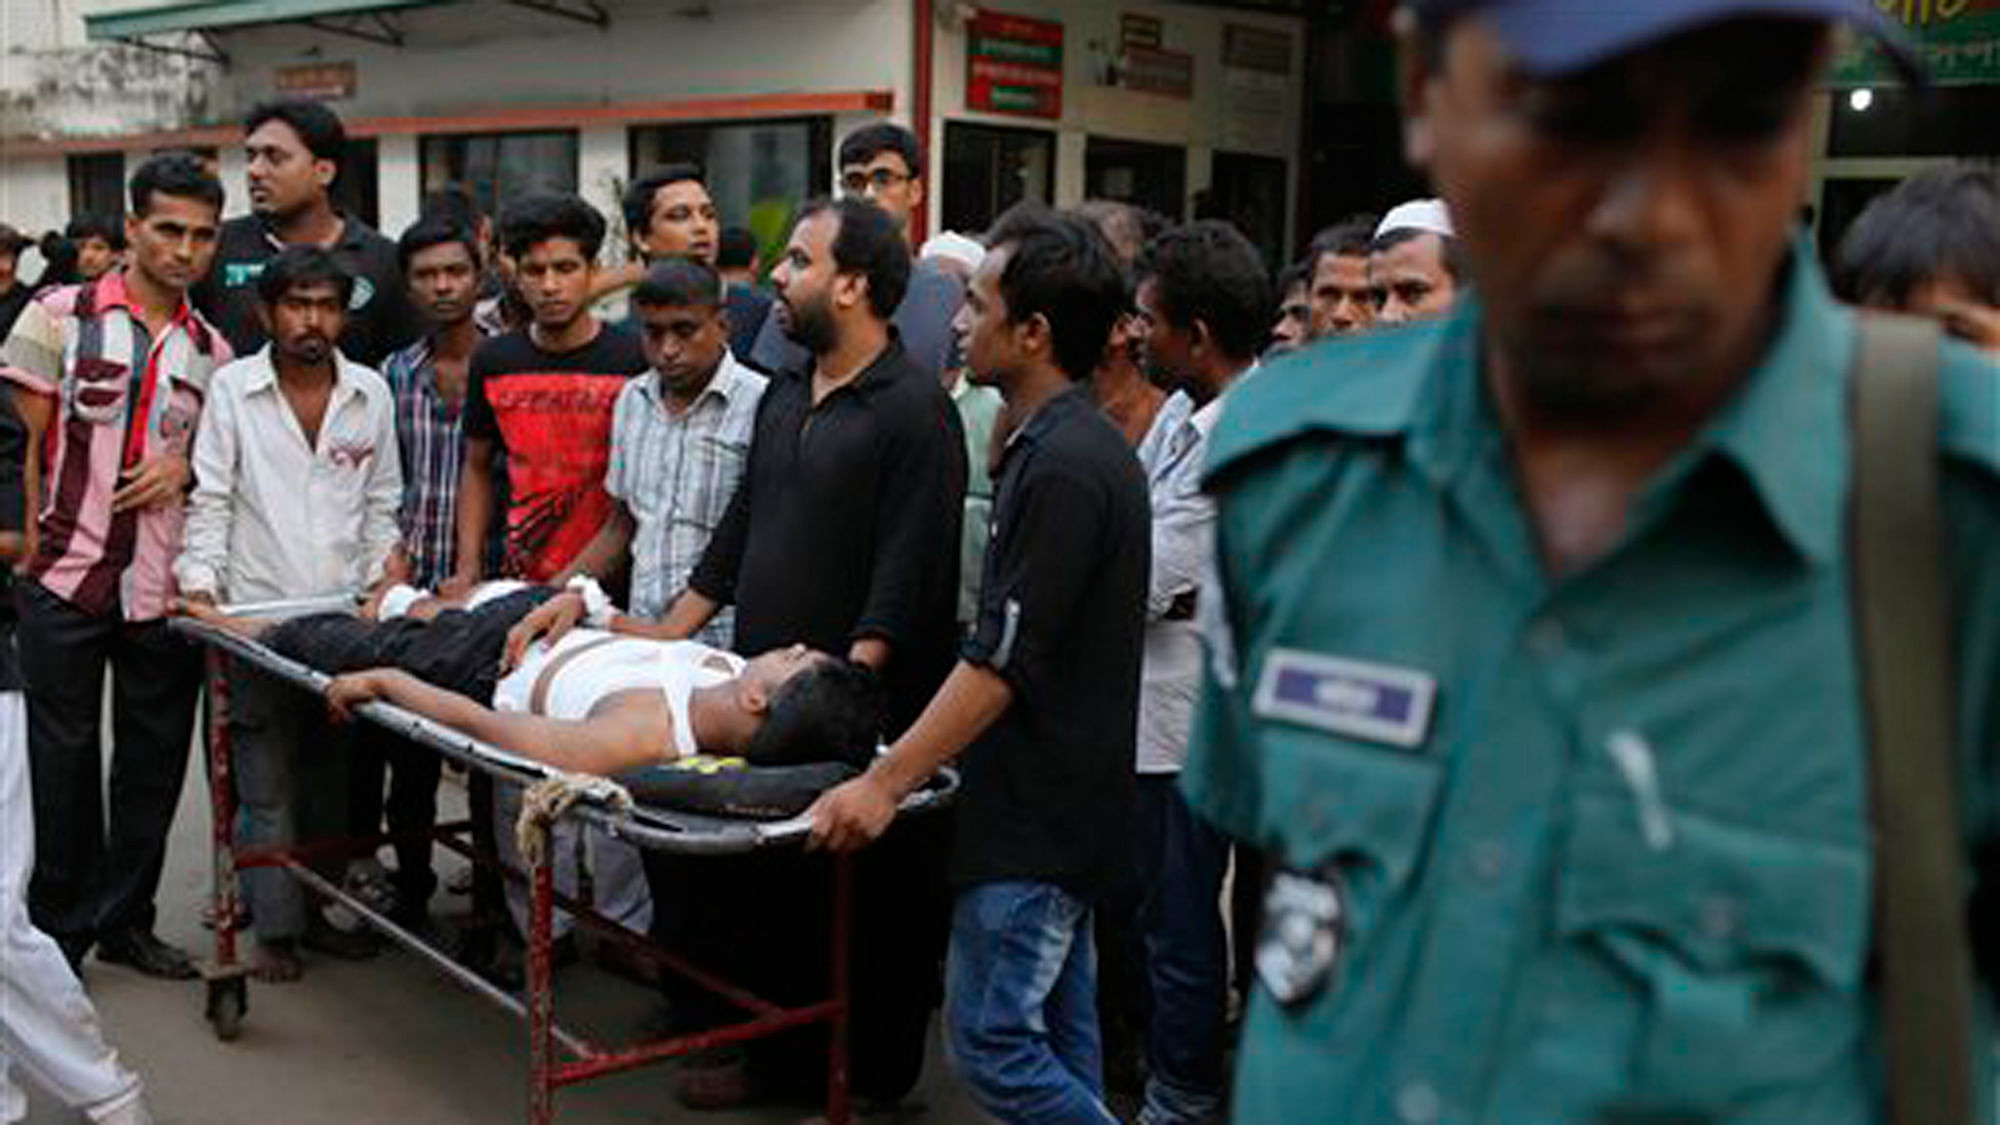 A person injured in the explosion being carried outside a hospital in Dhaka, Bangladesh on Oct. 24, 2015. (Photo: AP)